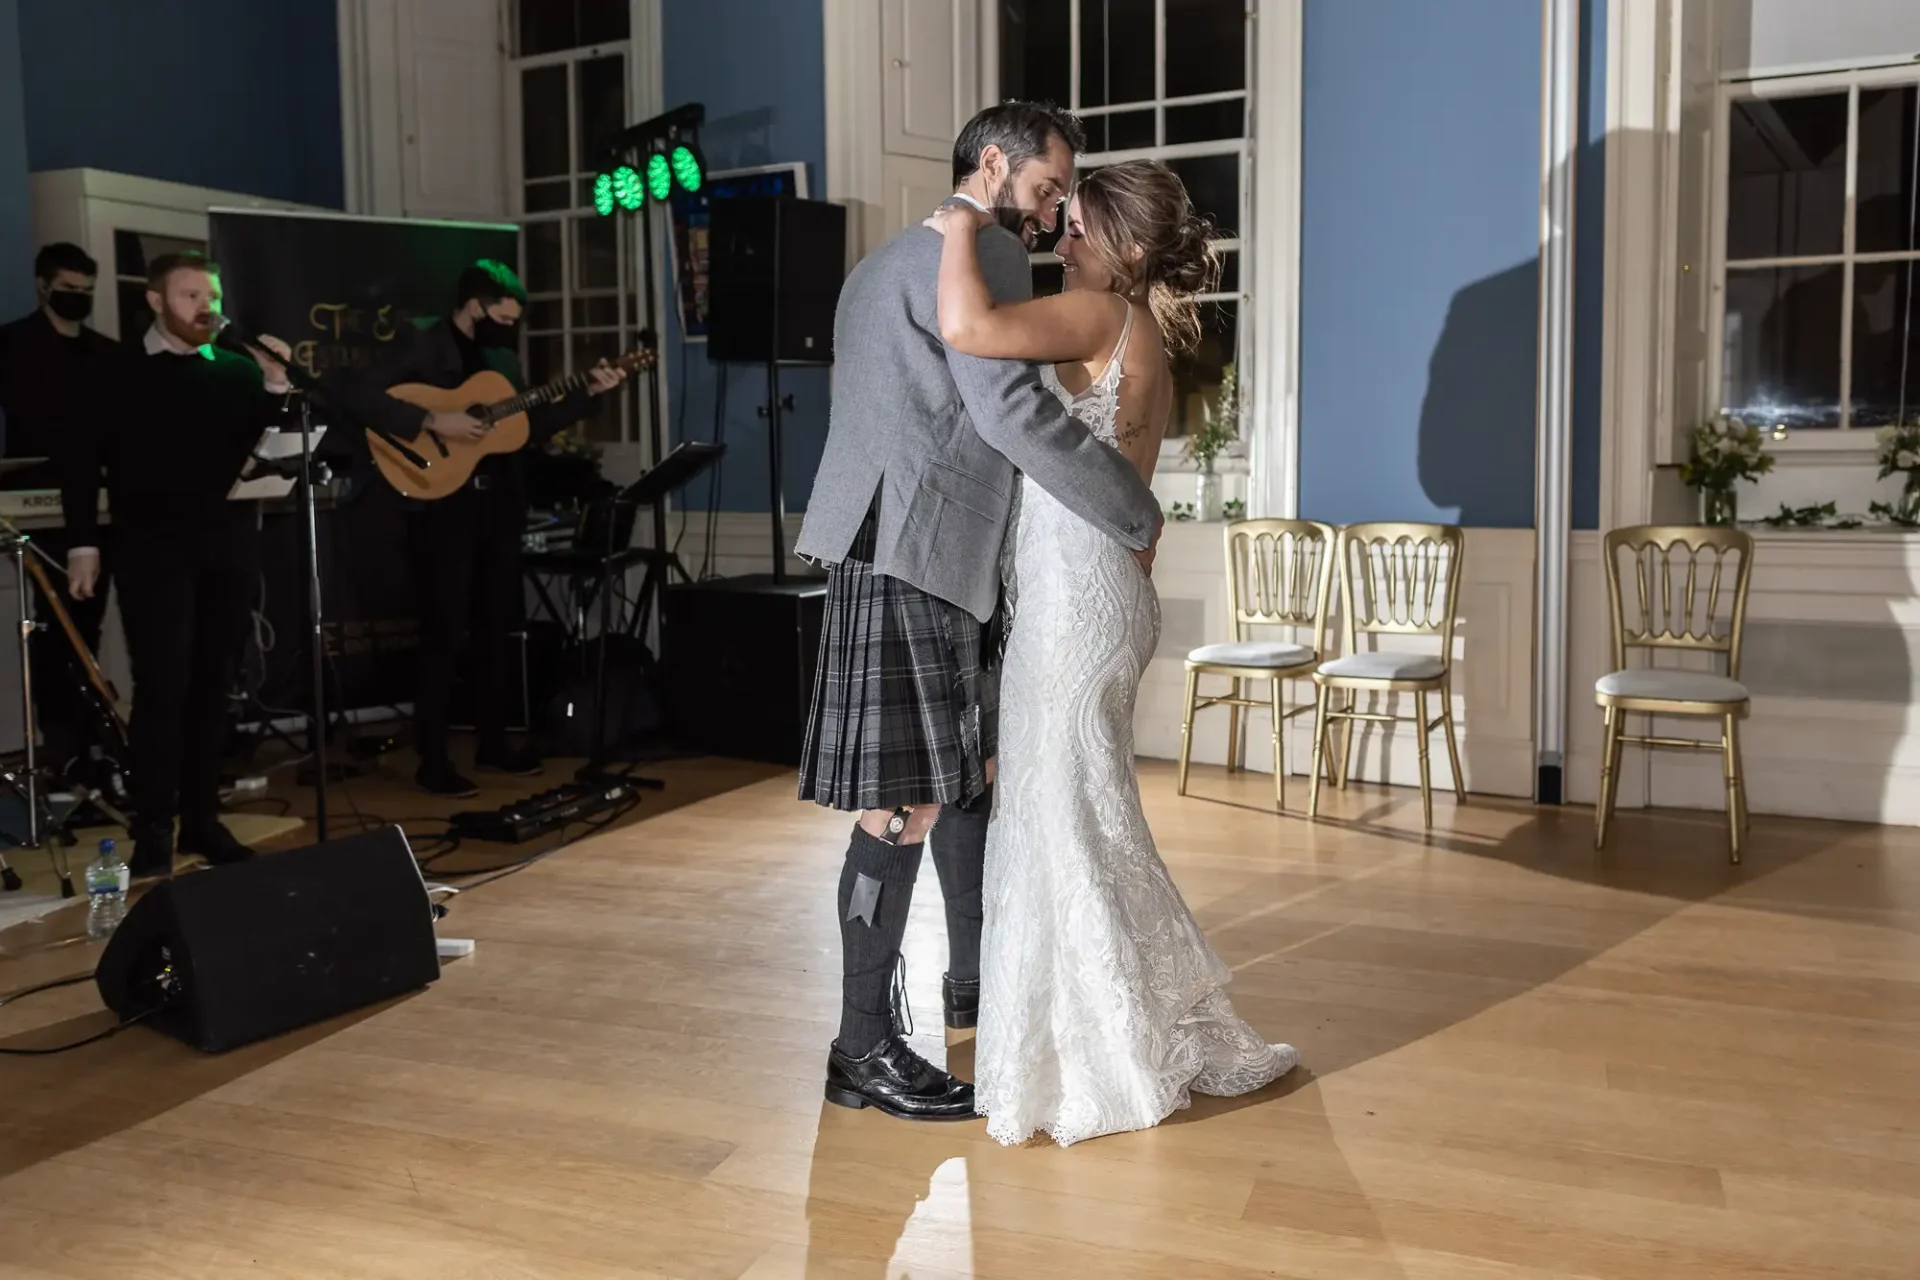 A couple in wedding attire, the groom in a kilt and the bride in a lace gown, share a dance in a ballroom with a live band in the background.